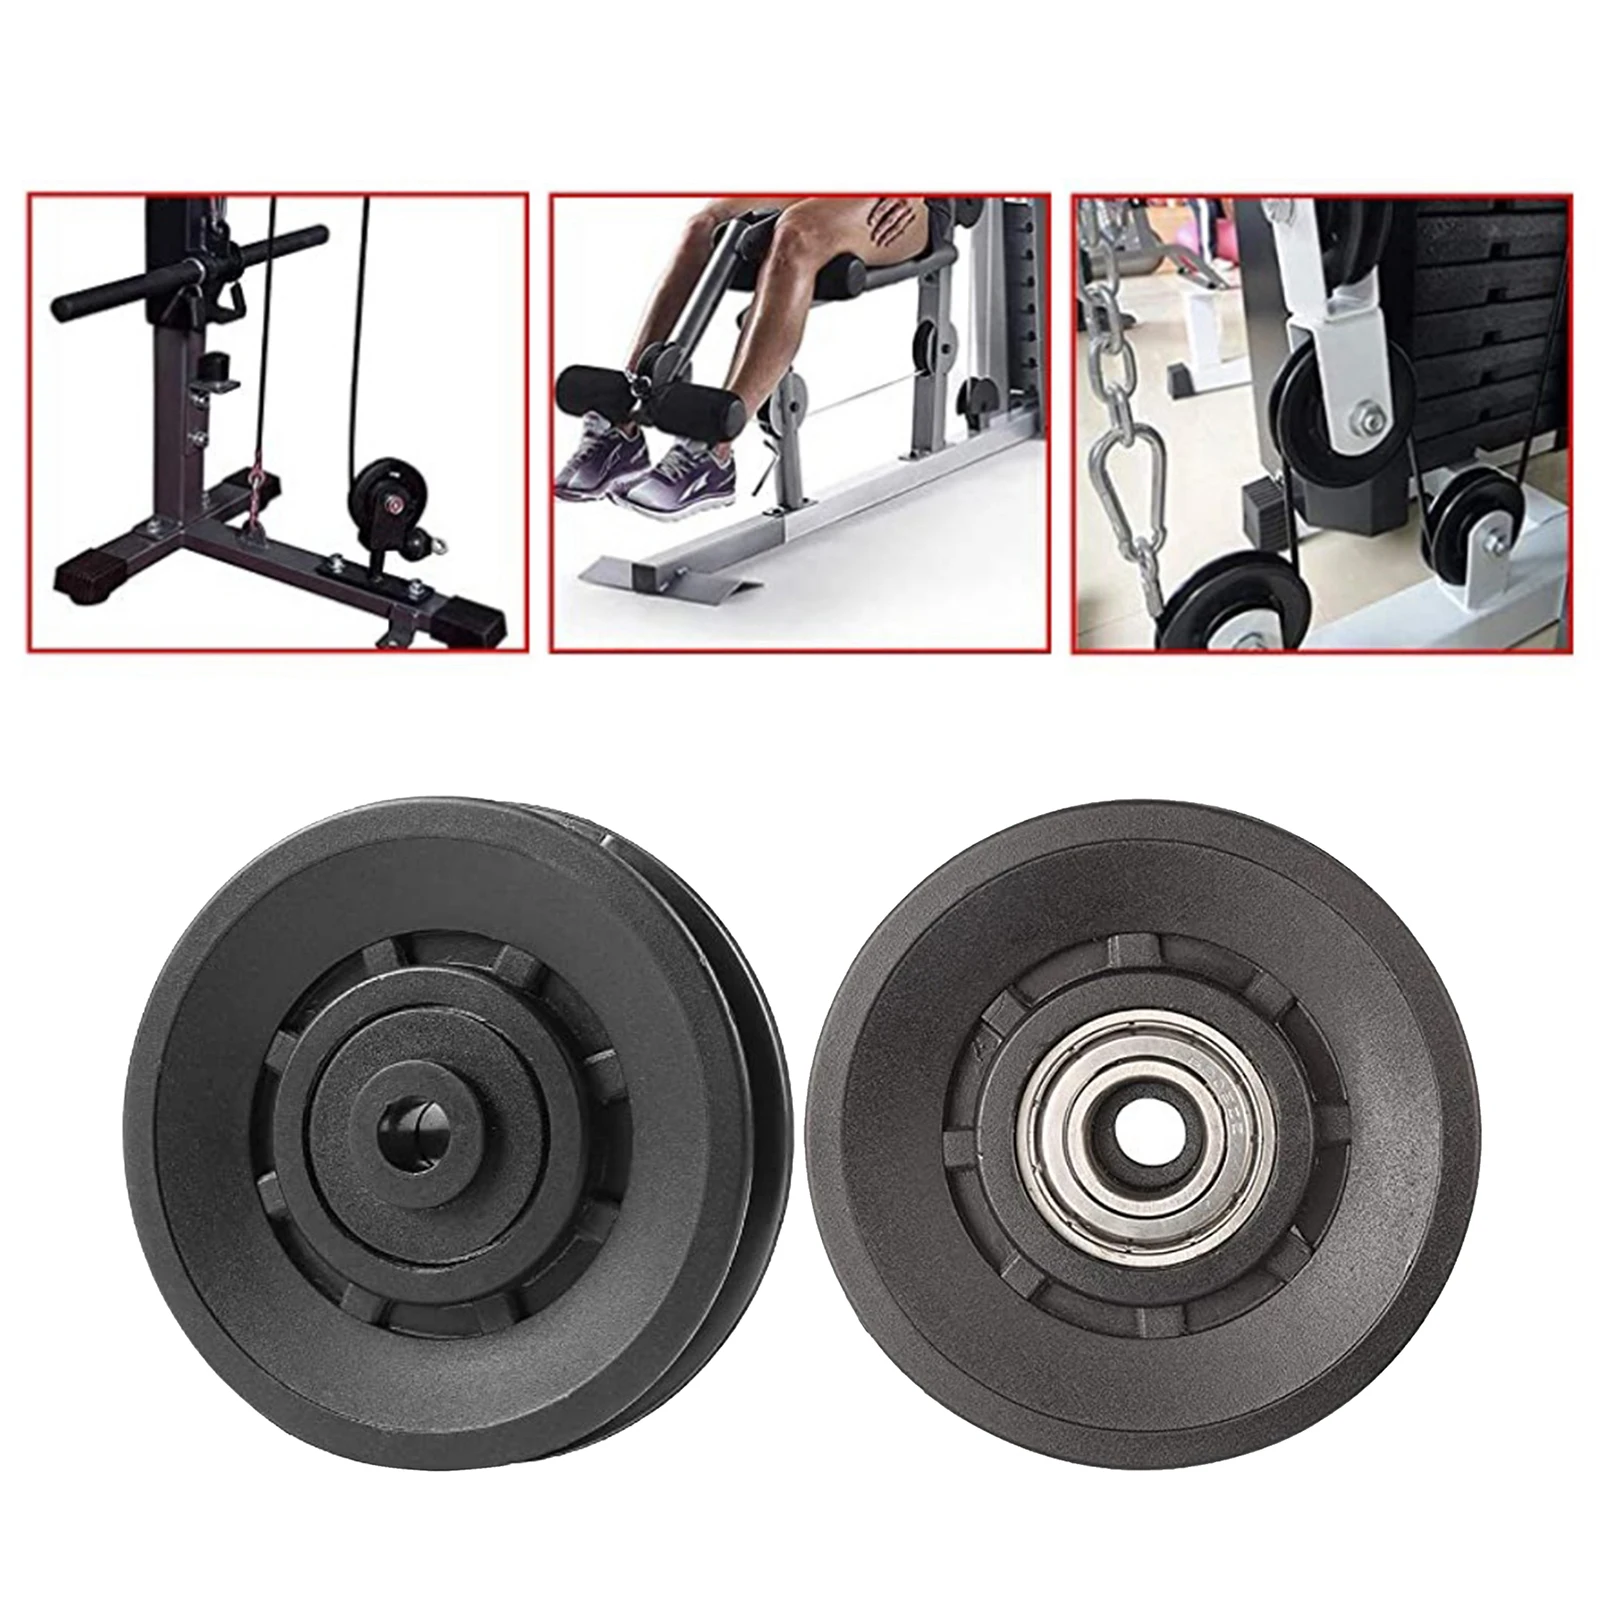 105mm Bearing Pully Wheels for Lifting Workout Home Gym Fitness Cables Machine 